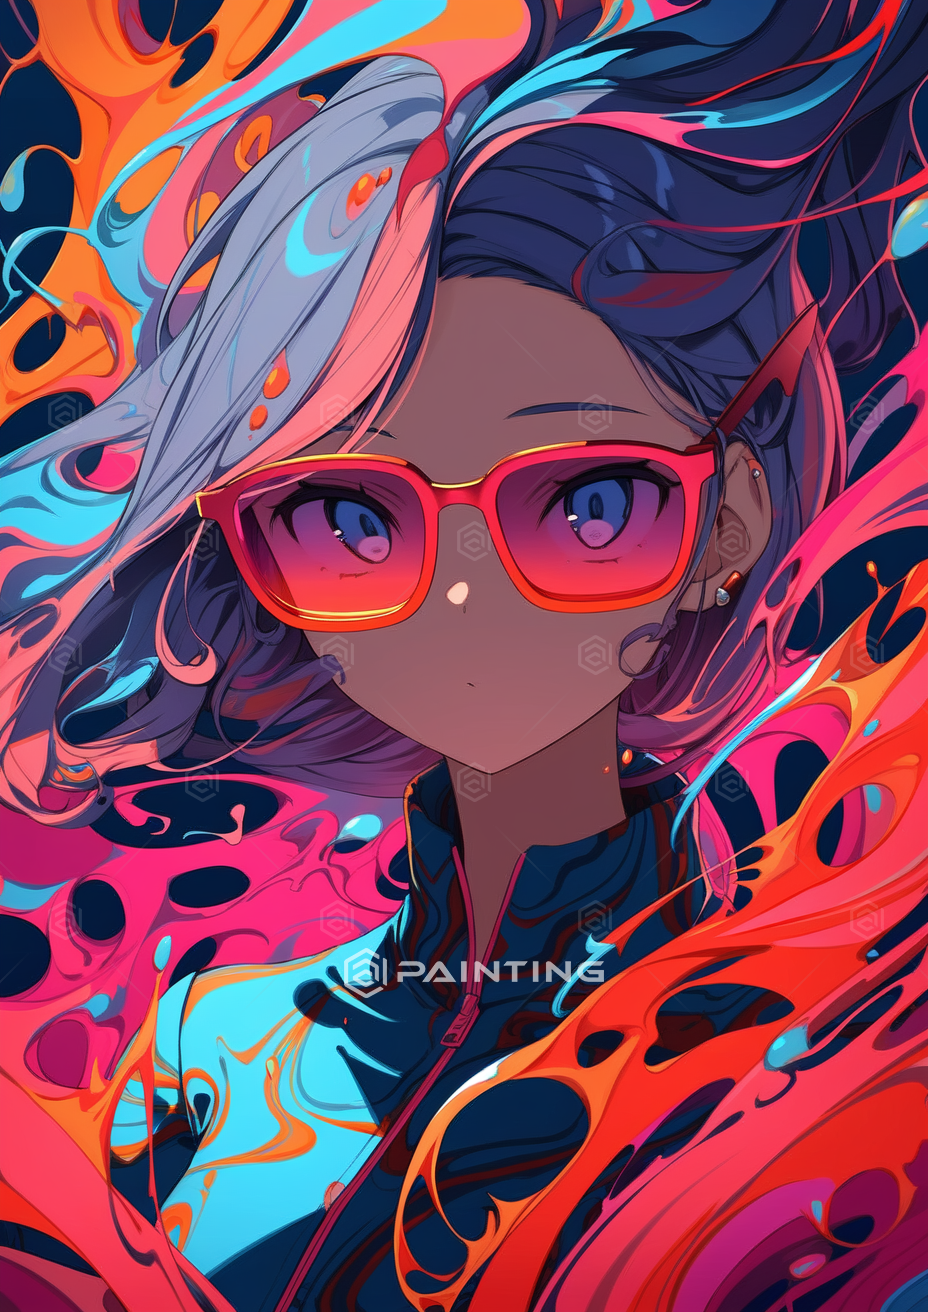 bright_anime_background_with_a_girl_wearing_sunglasses_in_t_bd7f94b4-87f1-4c85-9700-b0fa7d578094.png